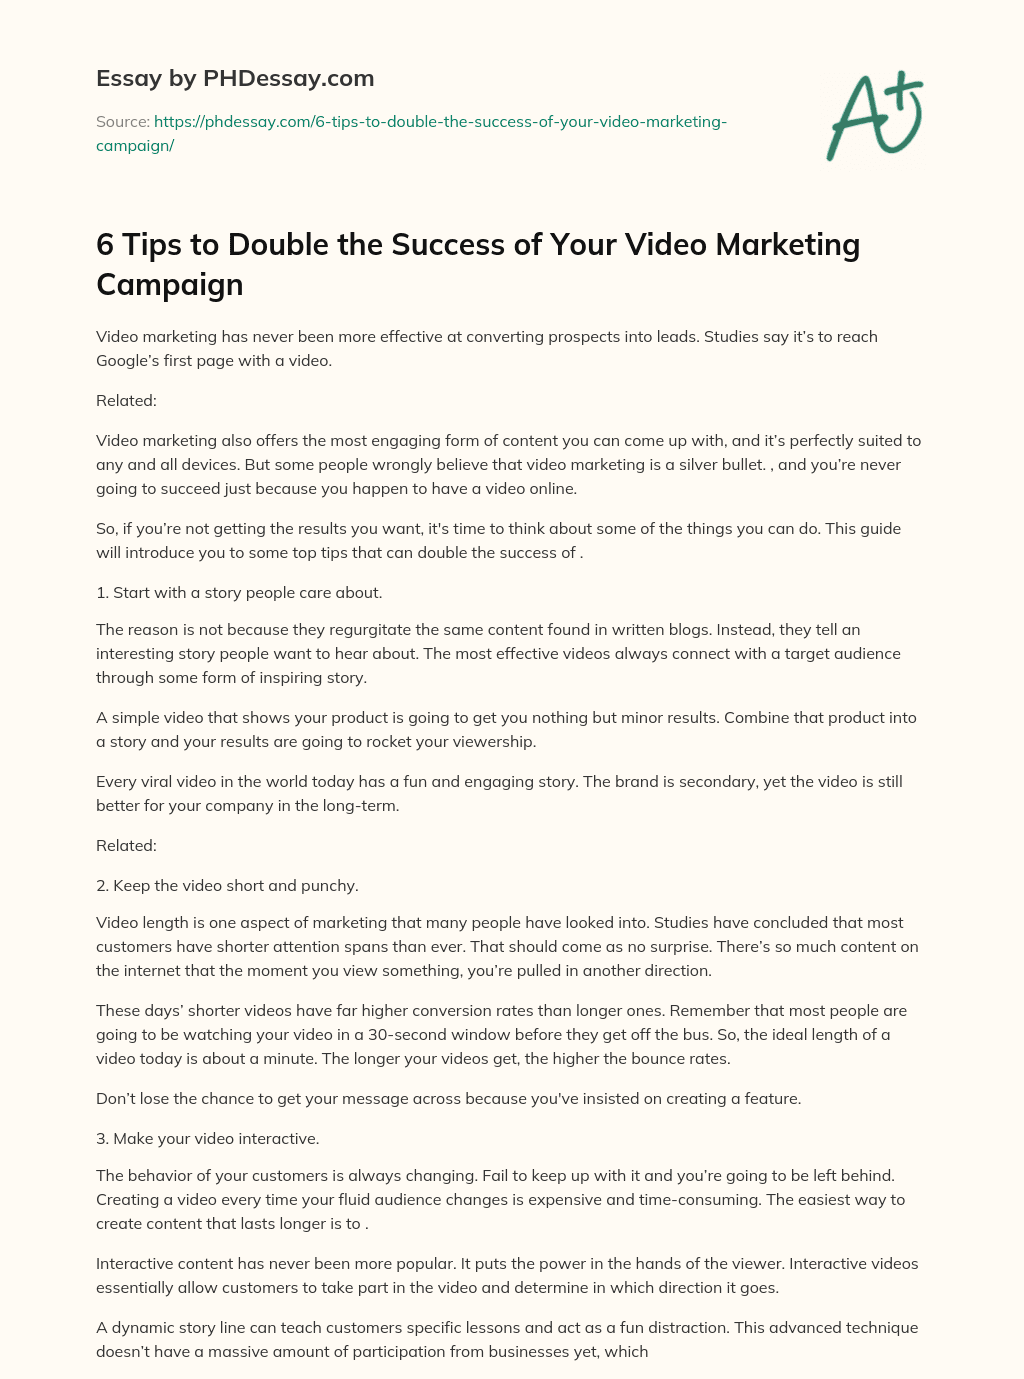 6 Tips to Double the Success of Your Video Marketing Campaign essay